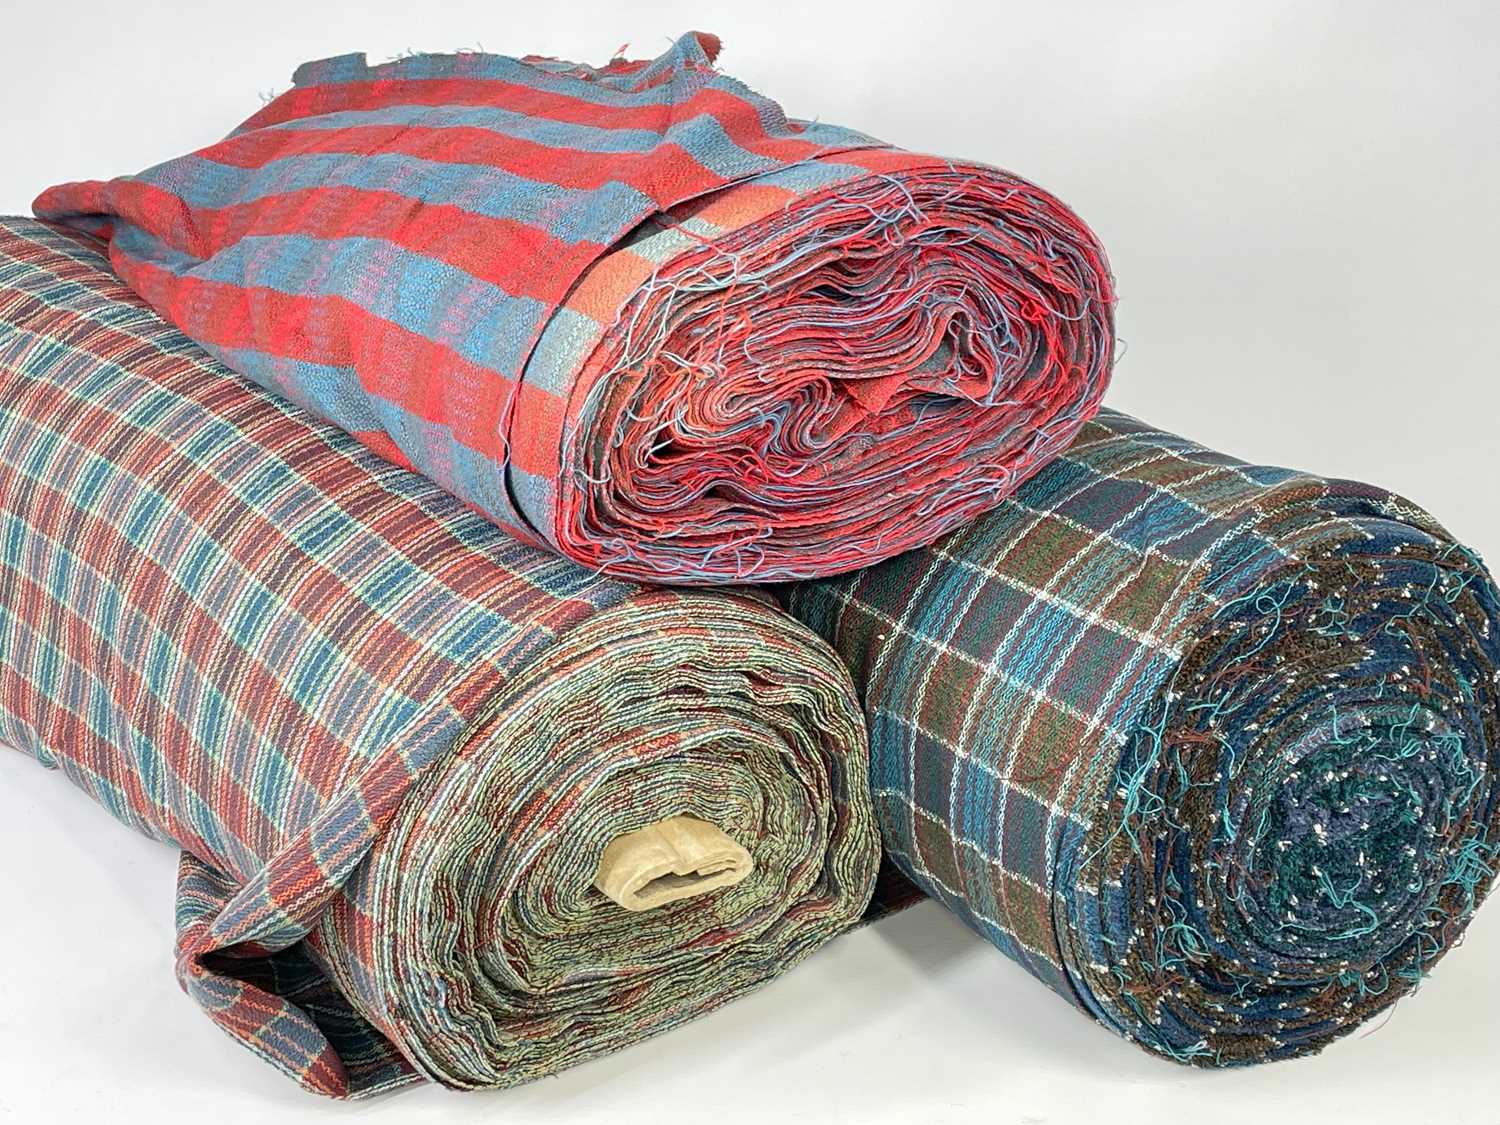 THREE BOLTS OF CHECK / PLAID WOOL FABRIC (3) Provenance: private collection Swansea Comments: good